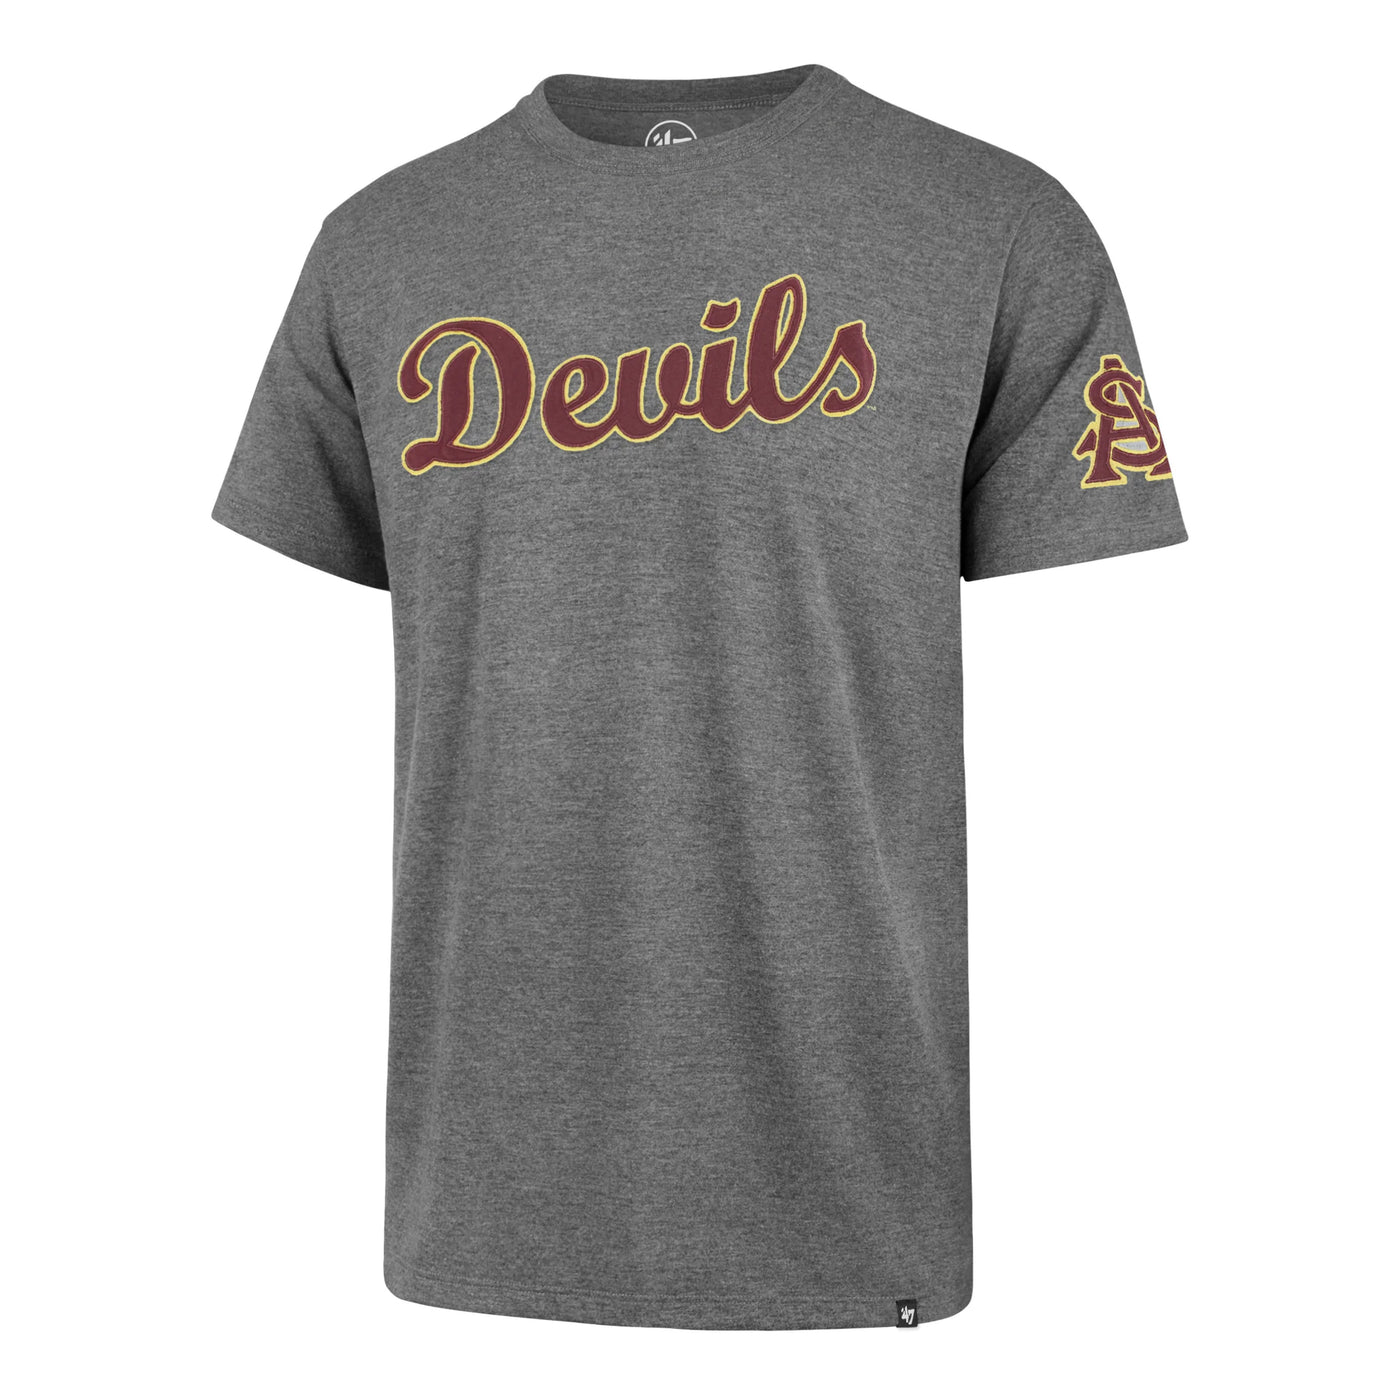 ASU grey short sleeve. Features one patch on the chest reading 